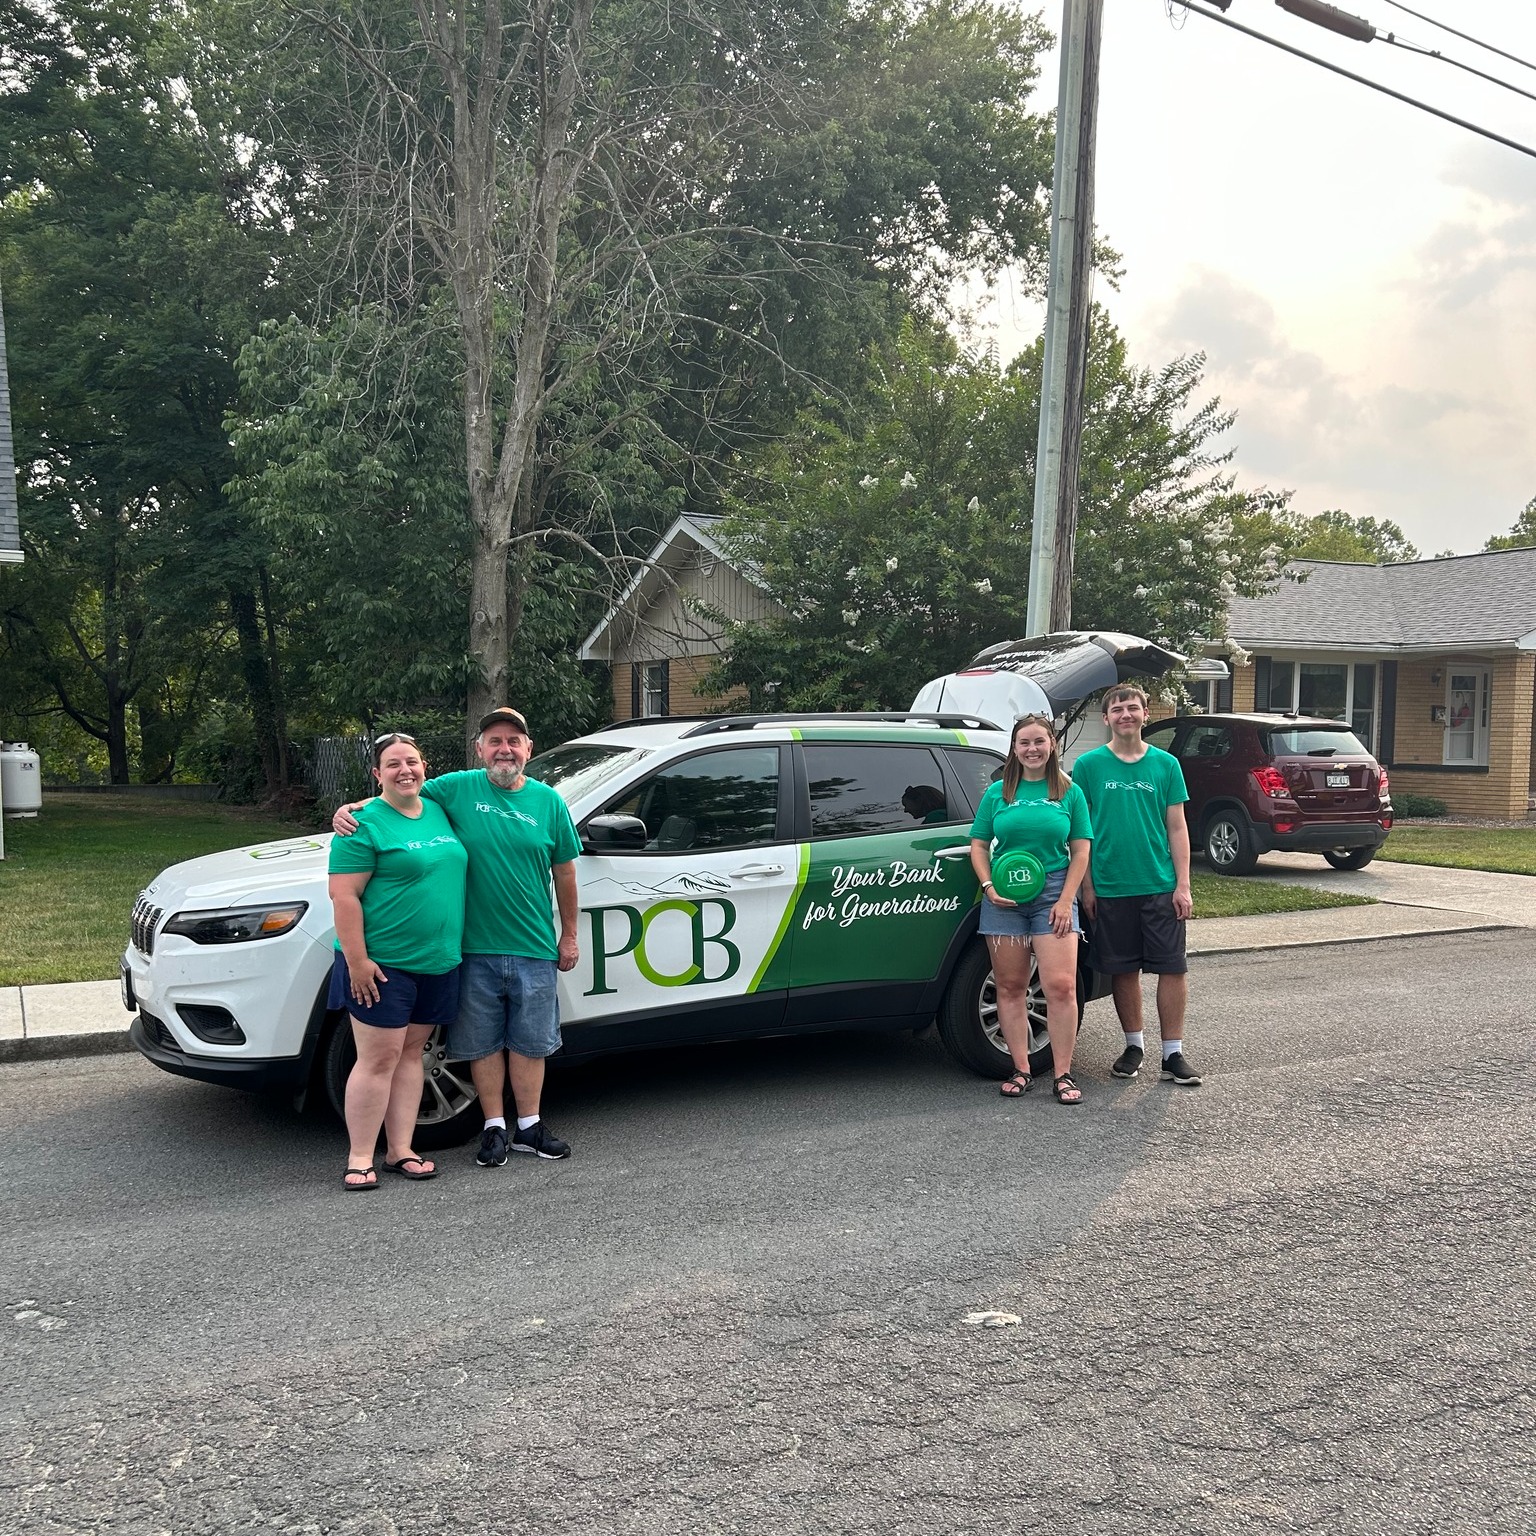 Employees at Petersburg PCB standing next to the PCB branded car in a neighborhood street with trees in the background. 